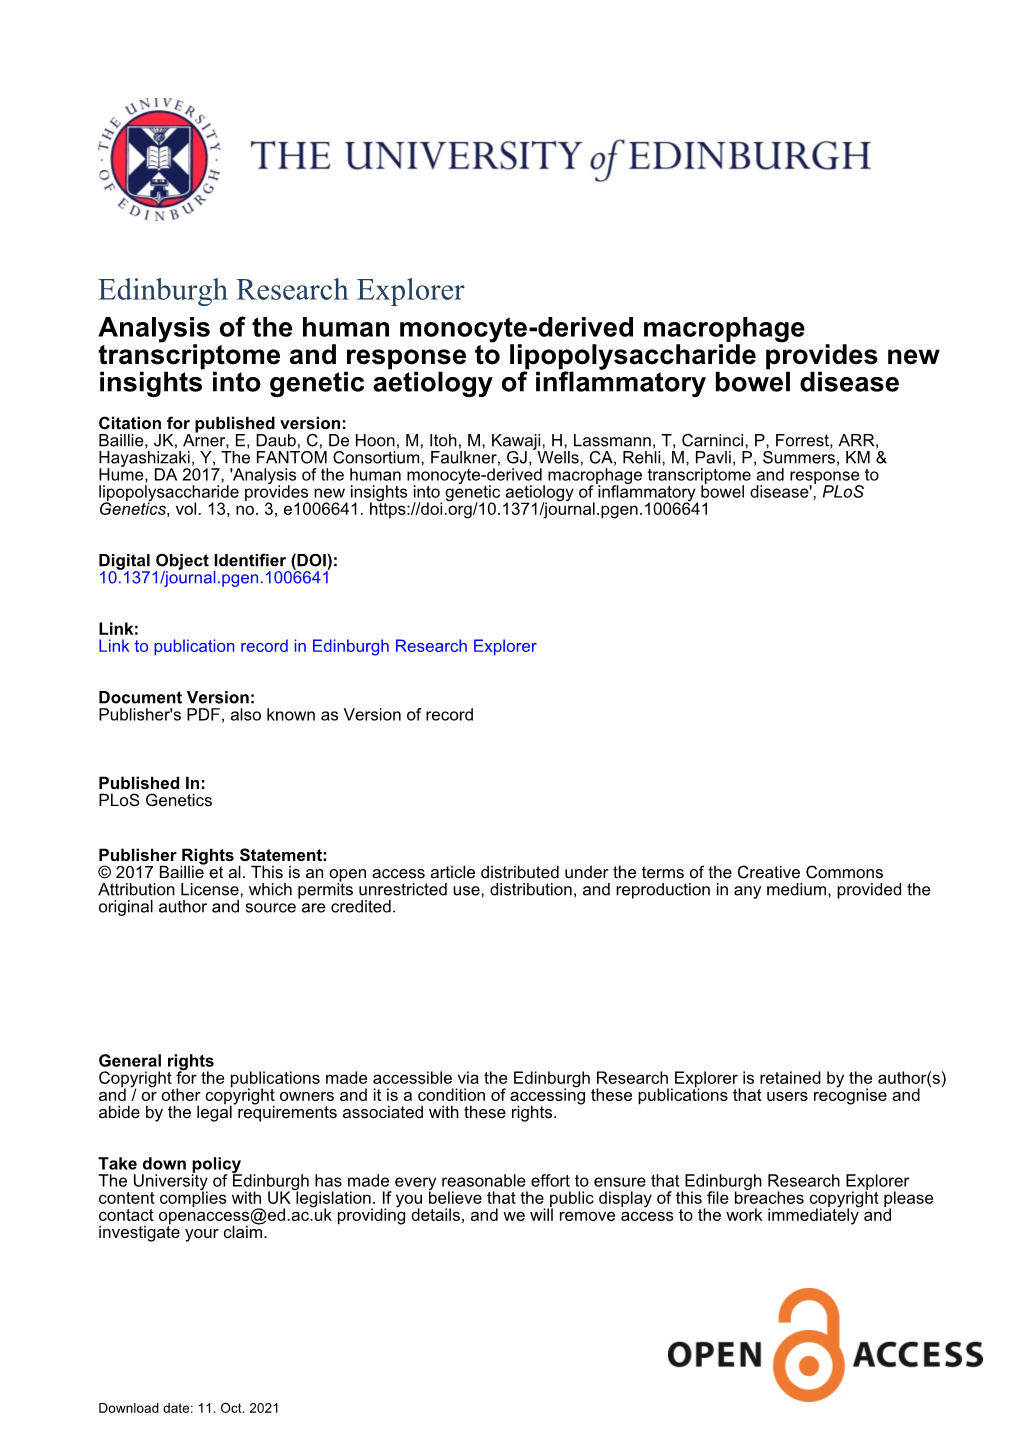 Analysis of the Human Monocyte-Derived Macrophage